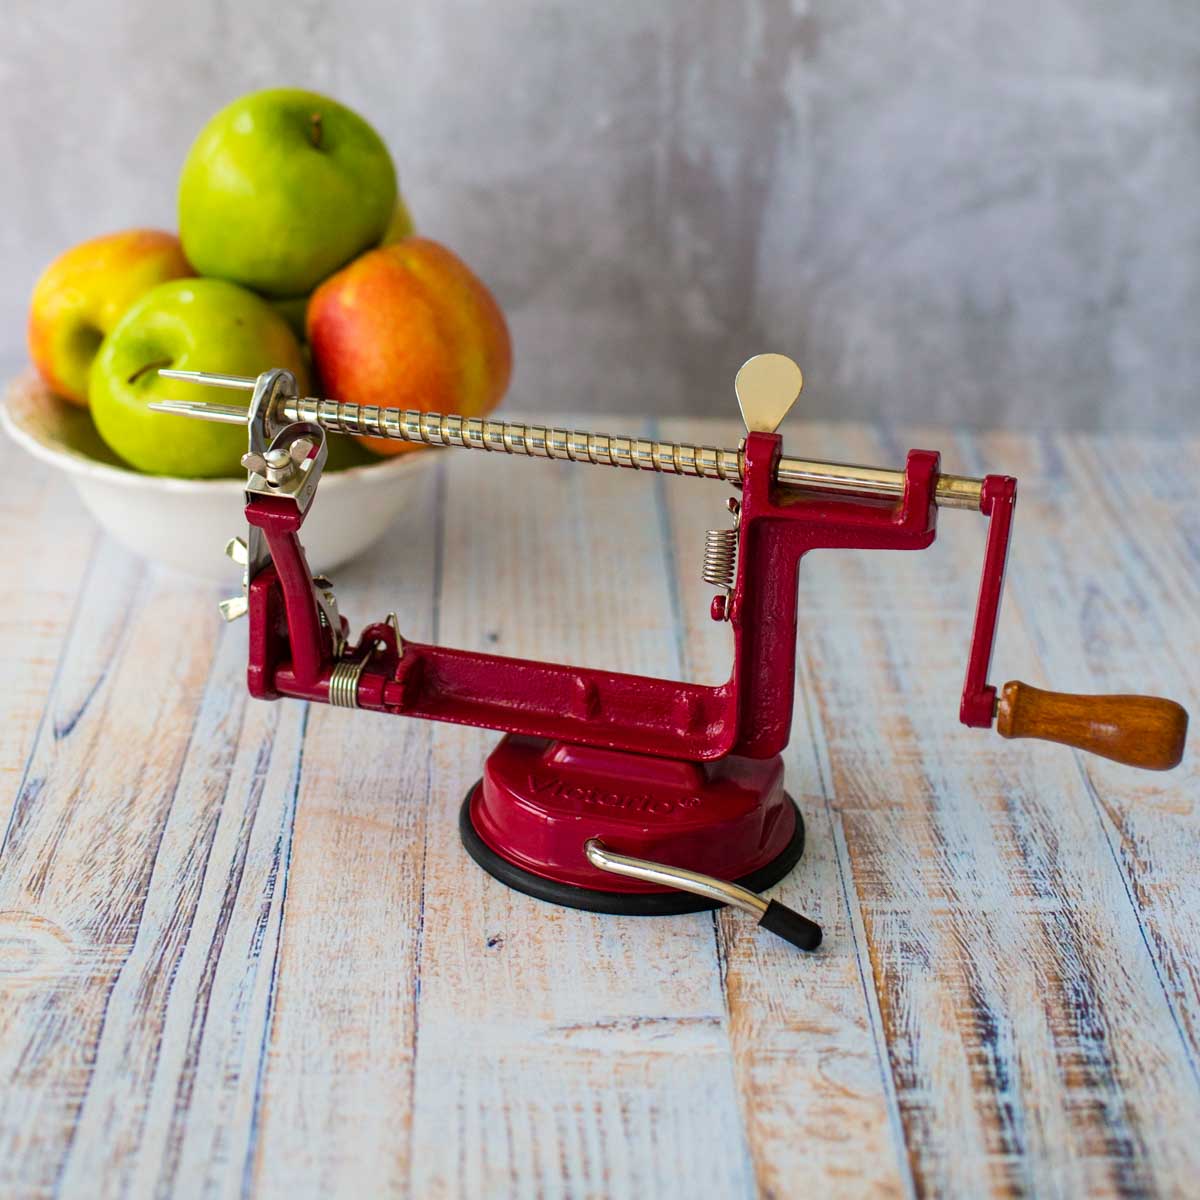 The red apple spiraler tool is shown next to a bowl of apples.